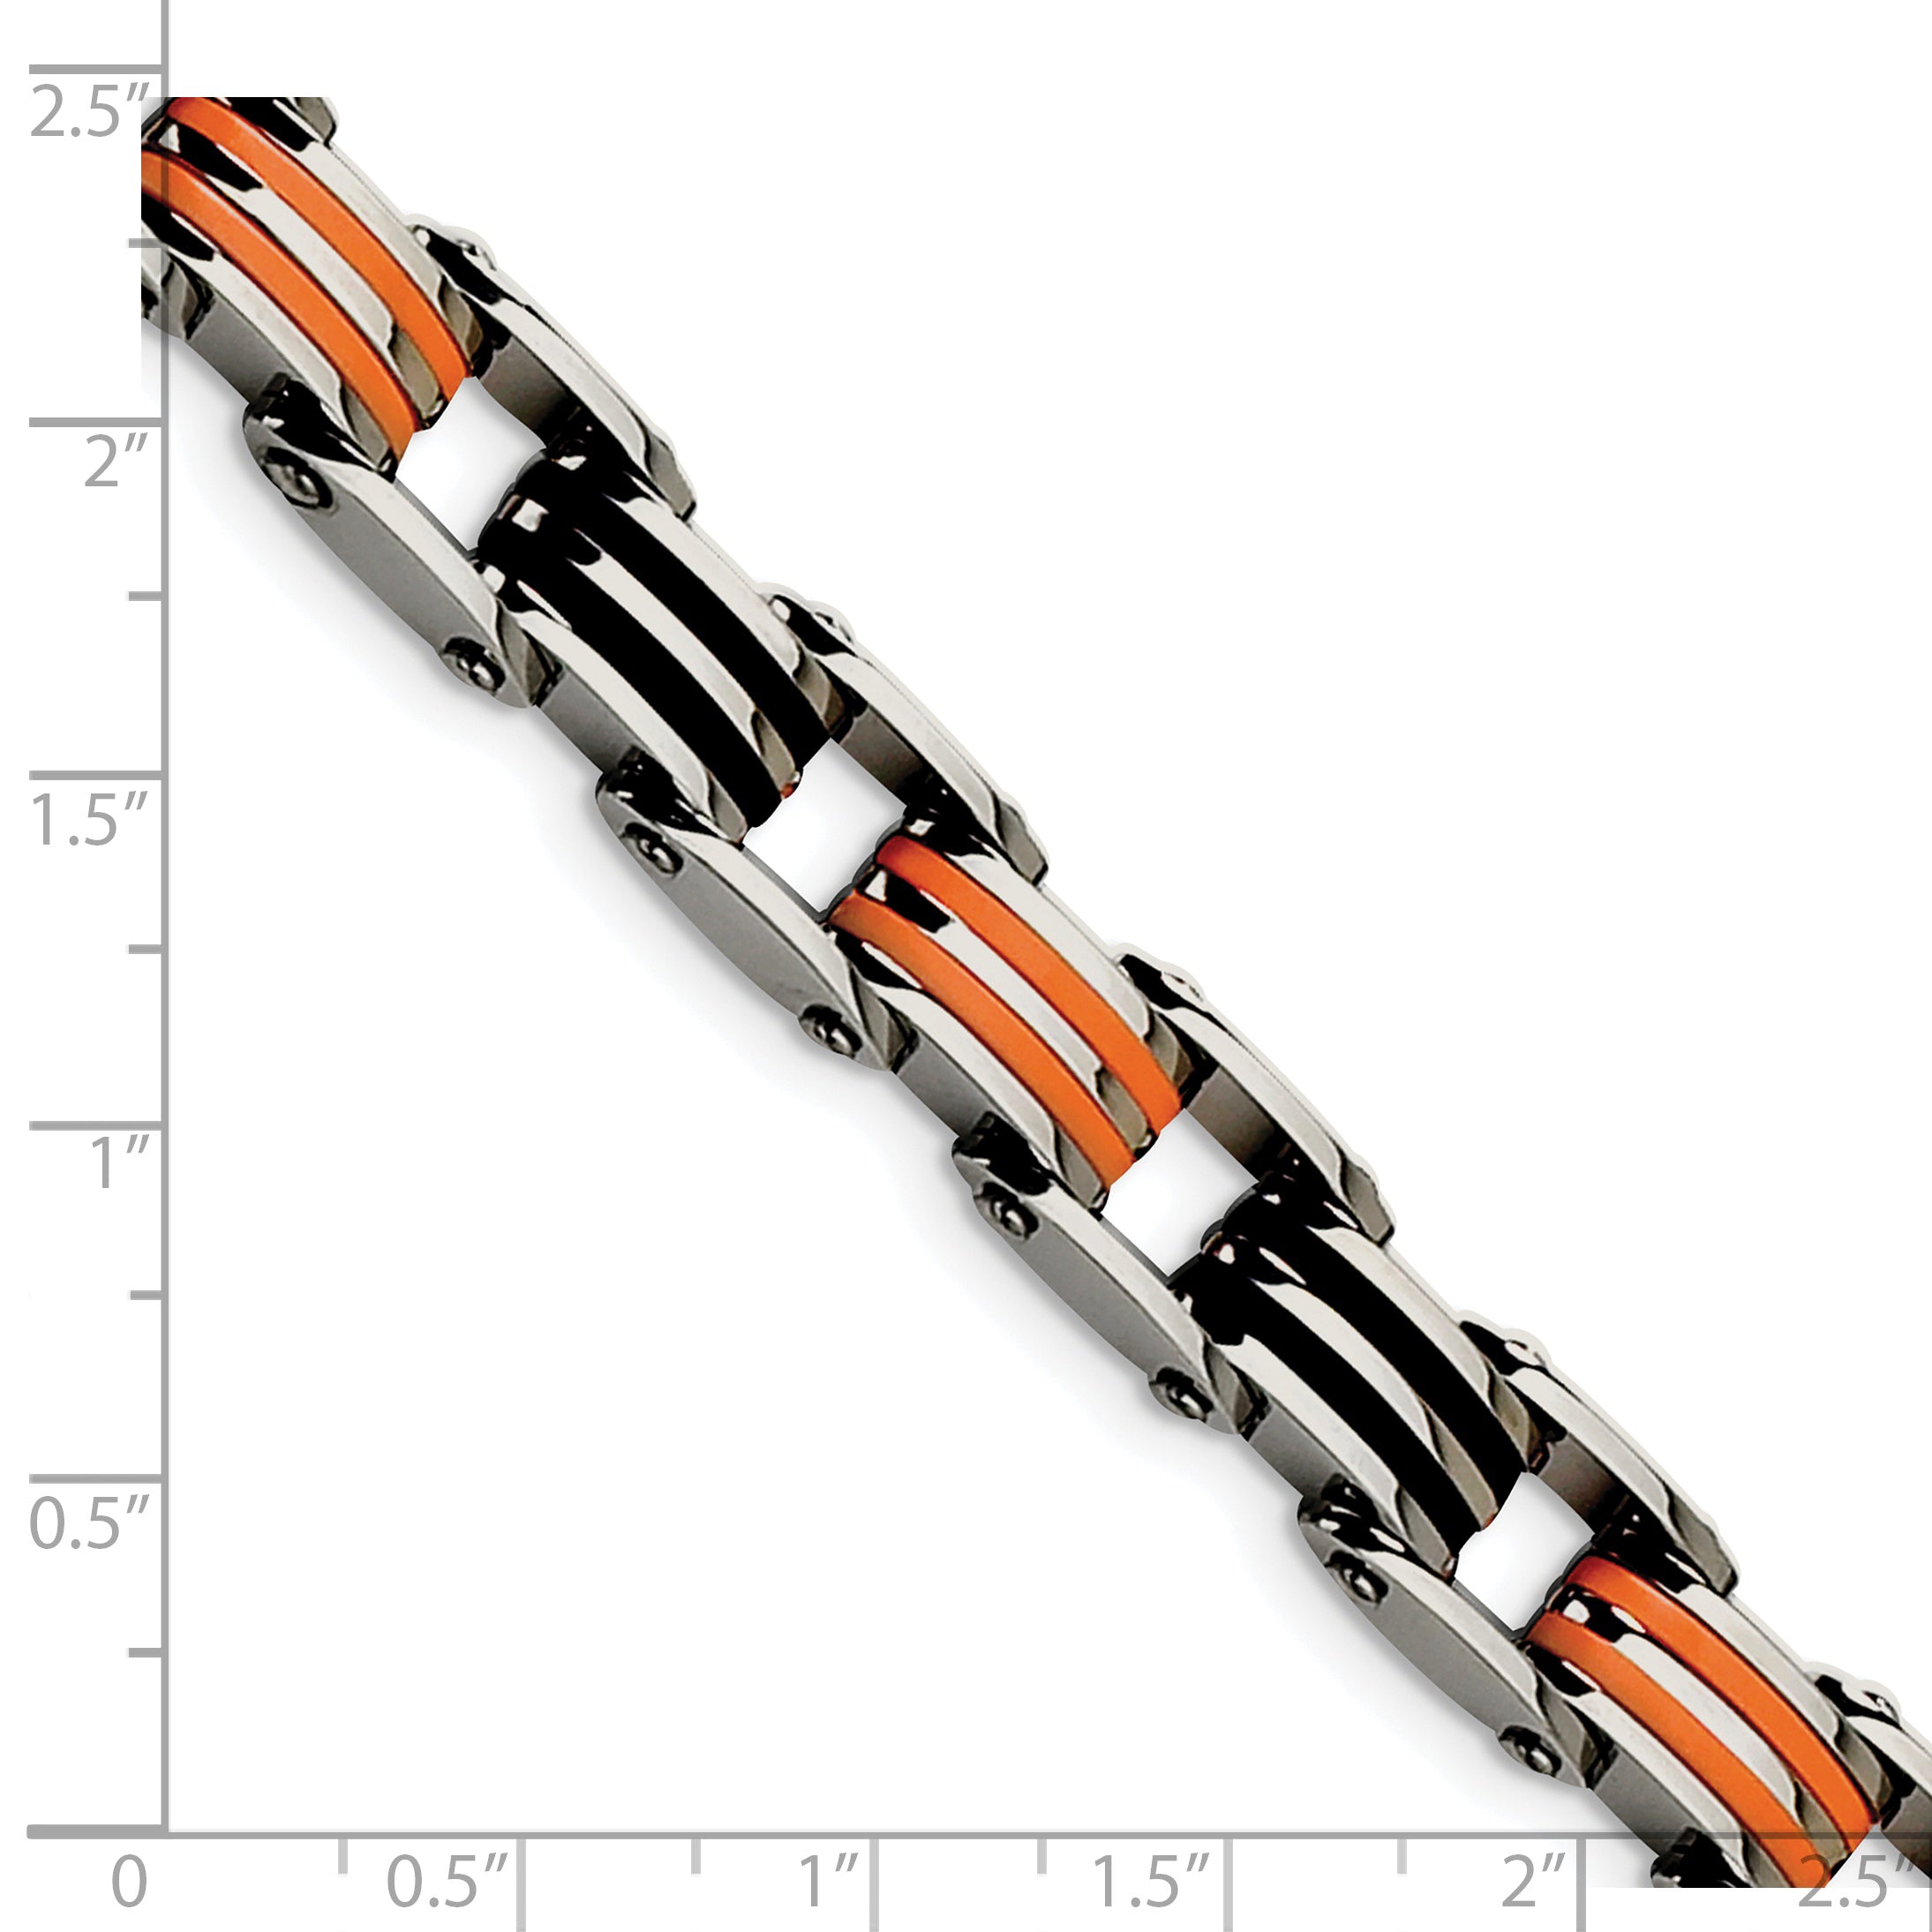 Chisel Stainless Steel Polished with Black and Orange Rubber 8.5 inch Link Bracelet